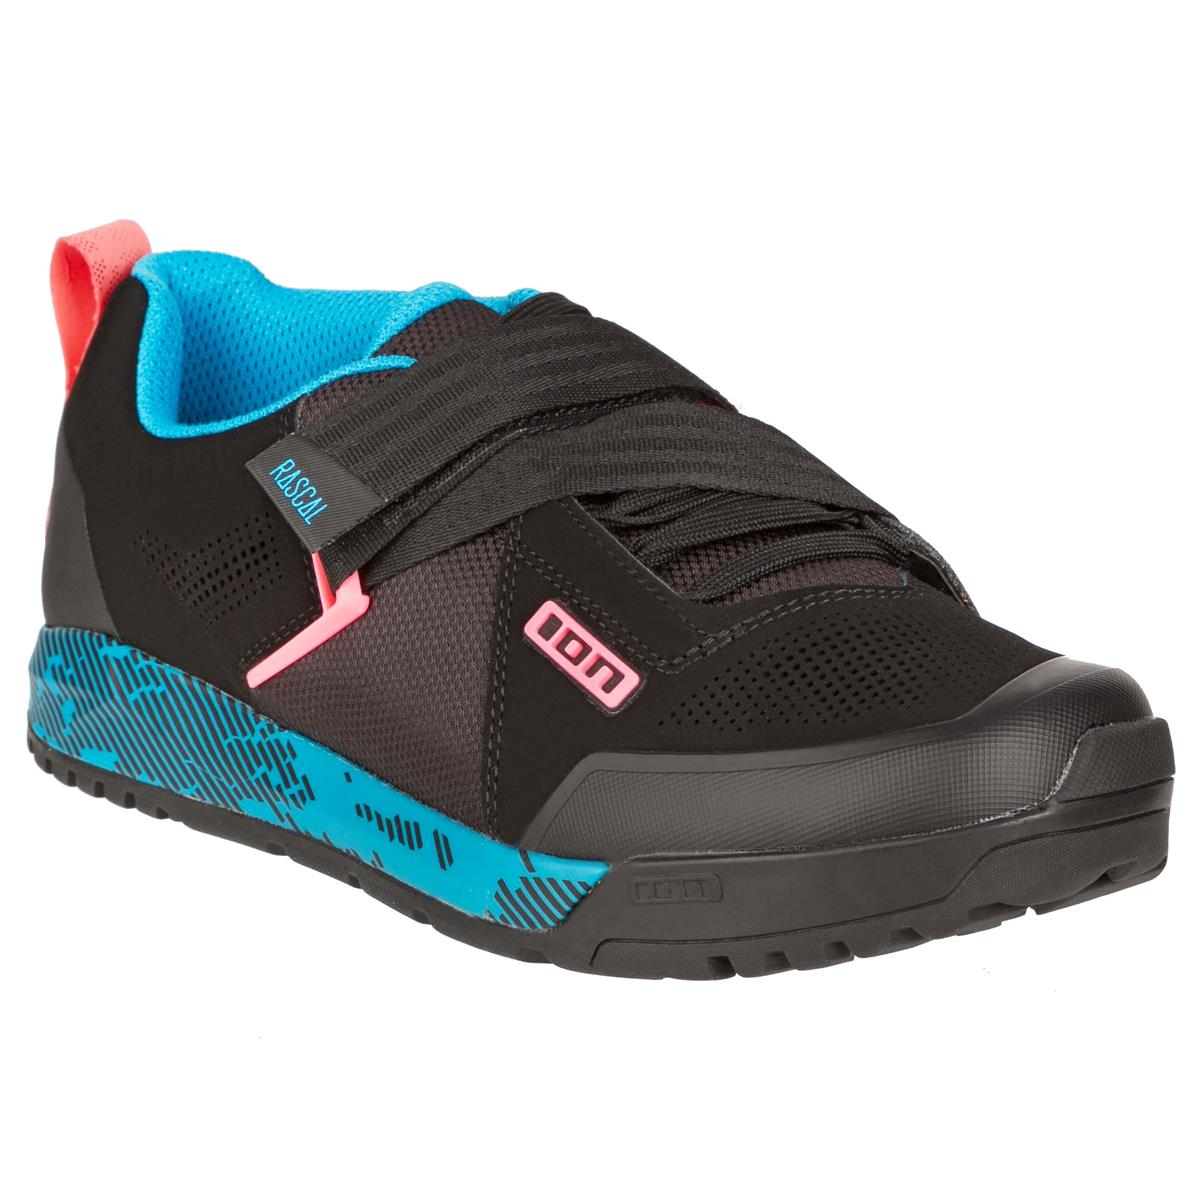 ION Chaussures VTT Rascal Multicolor